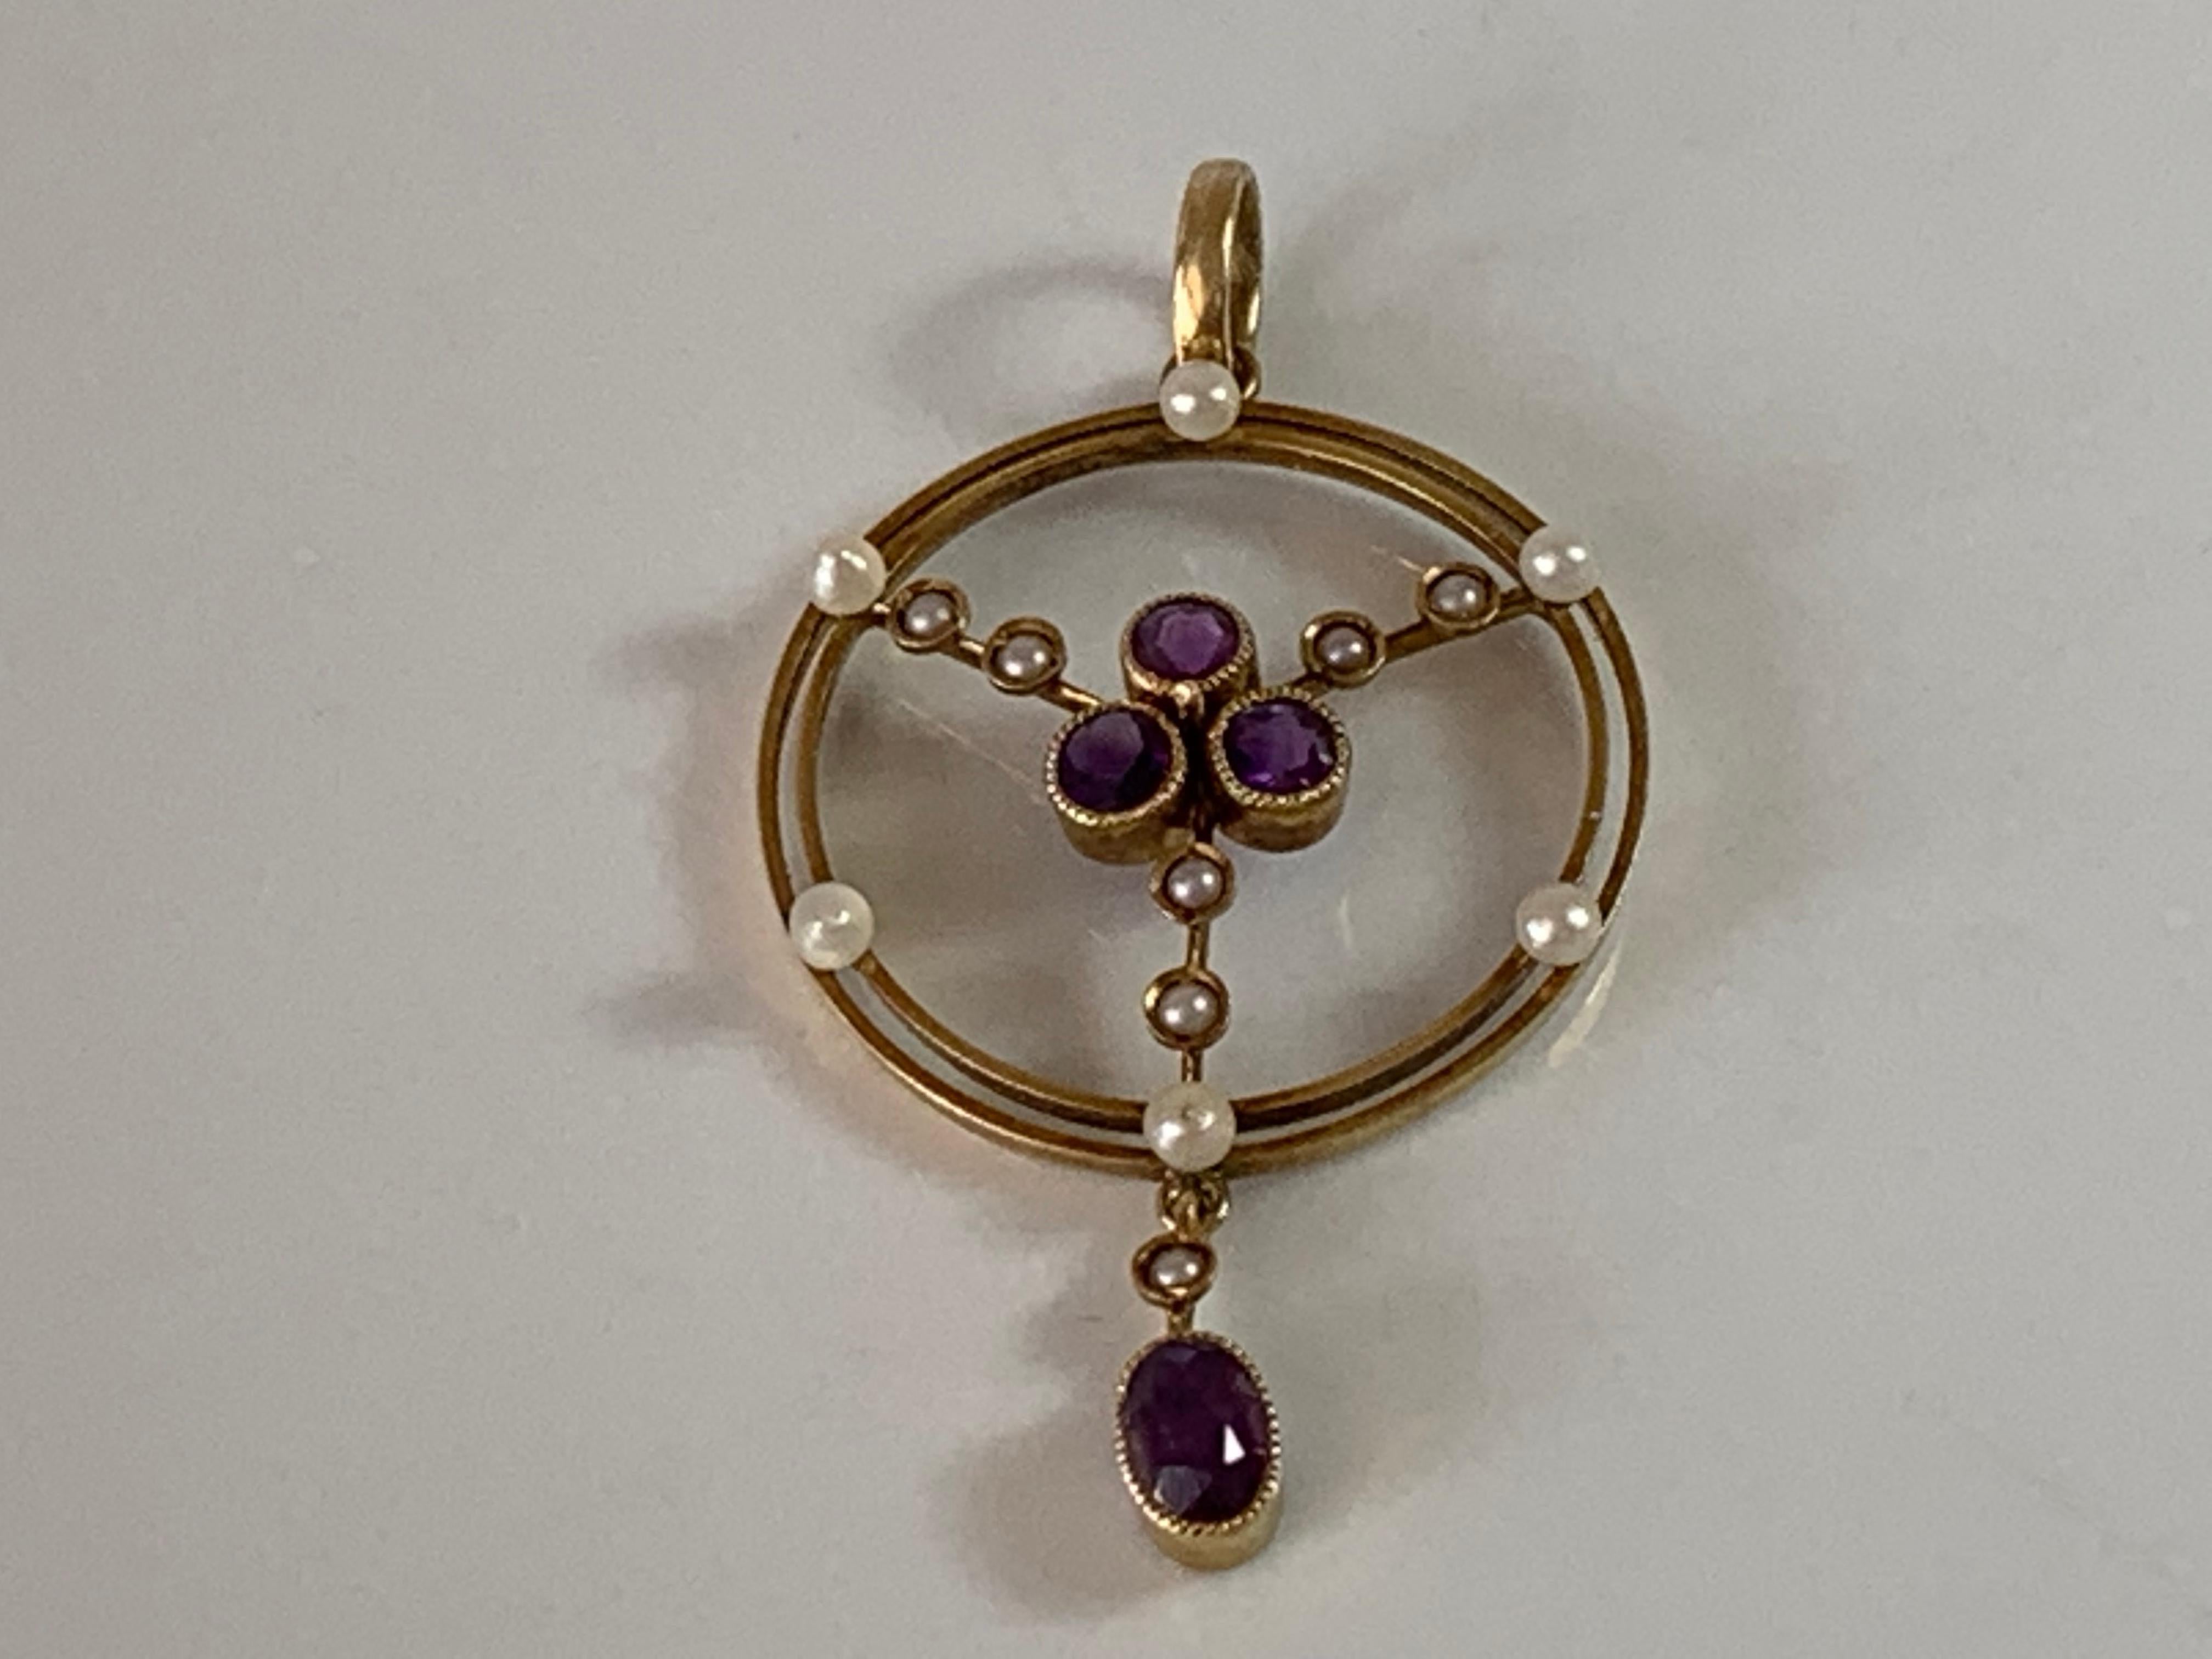 15ct 585 Gold Antique Pearl & Amethyst Pendant
Beautiful Symmetrical Edwardian Design 
and finished by a larger swinging Amethyst
Stamped 15ct on Bail
